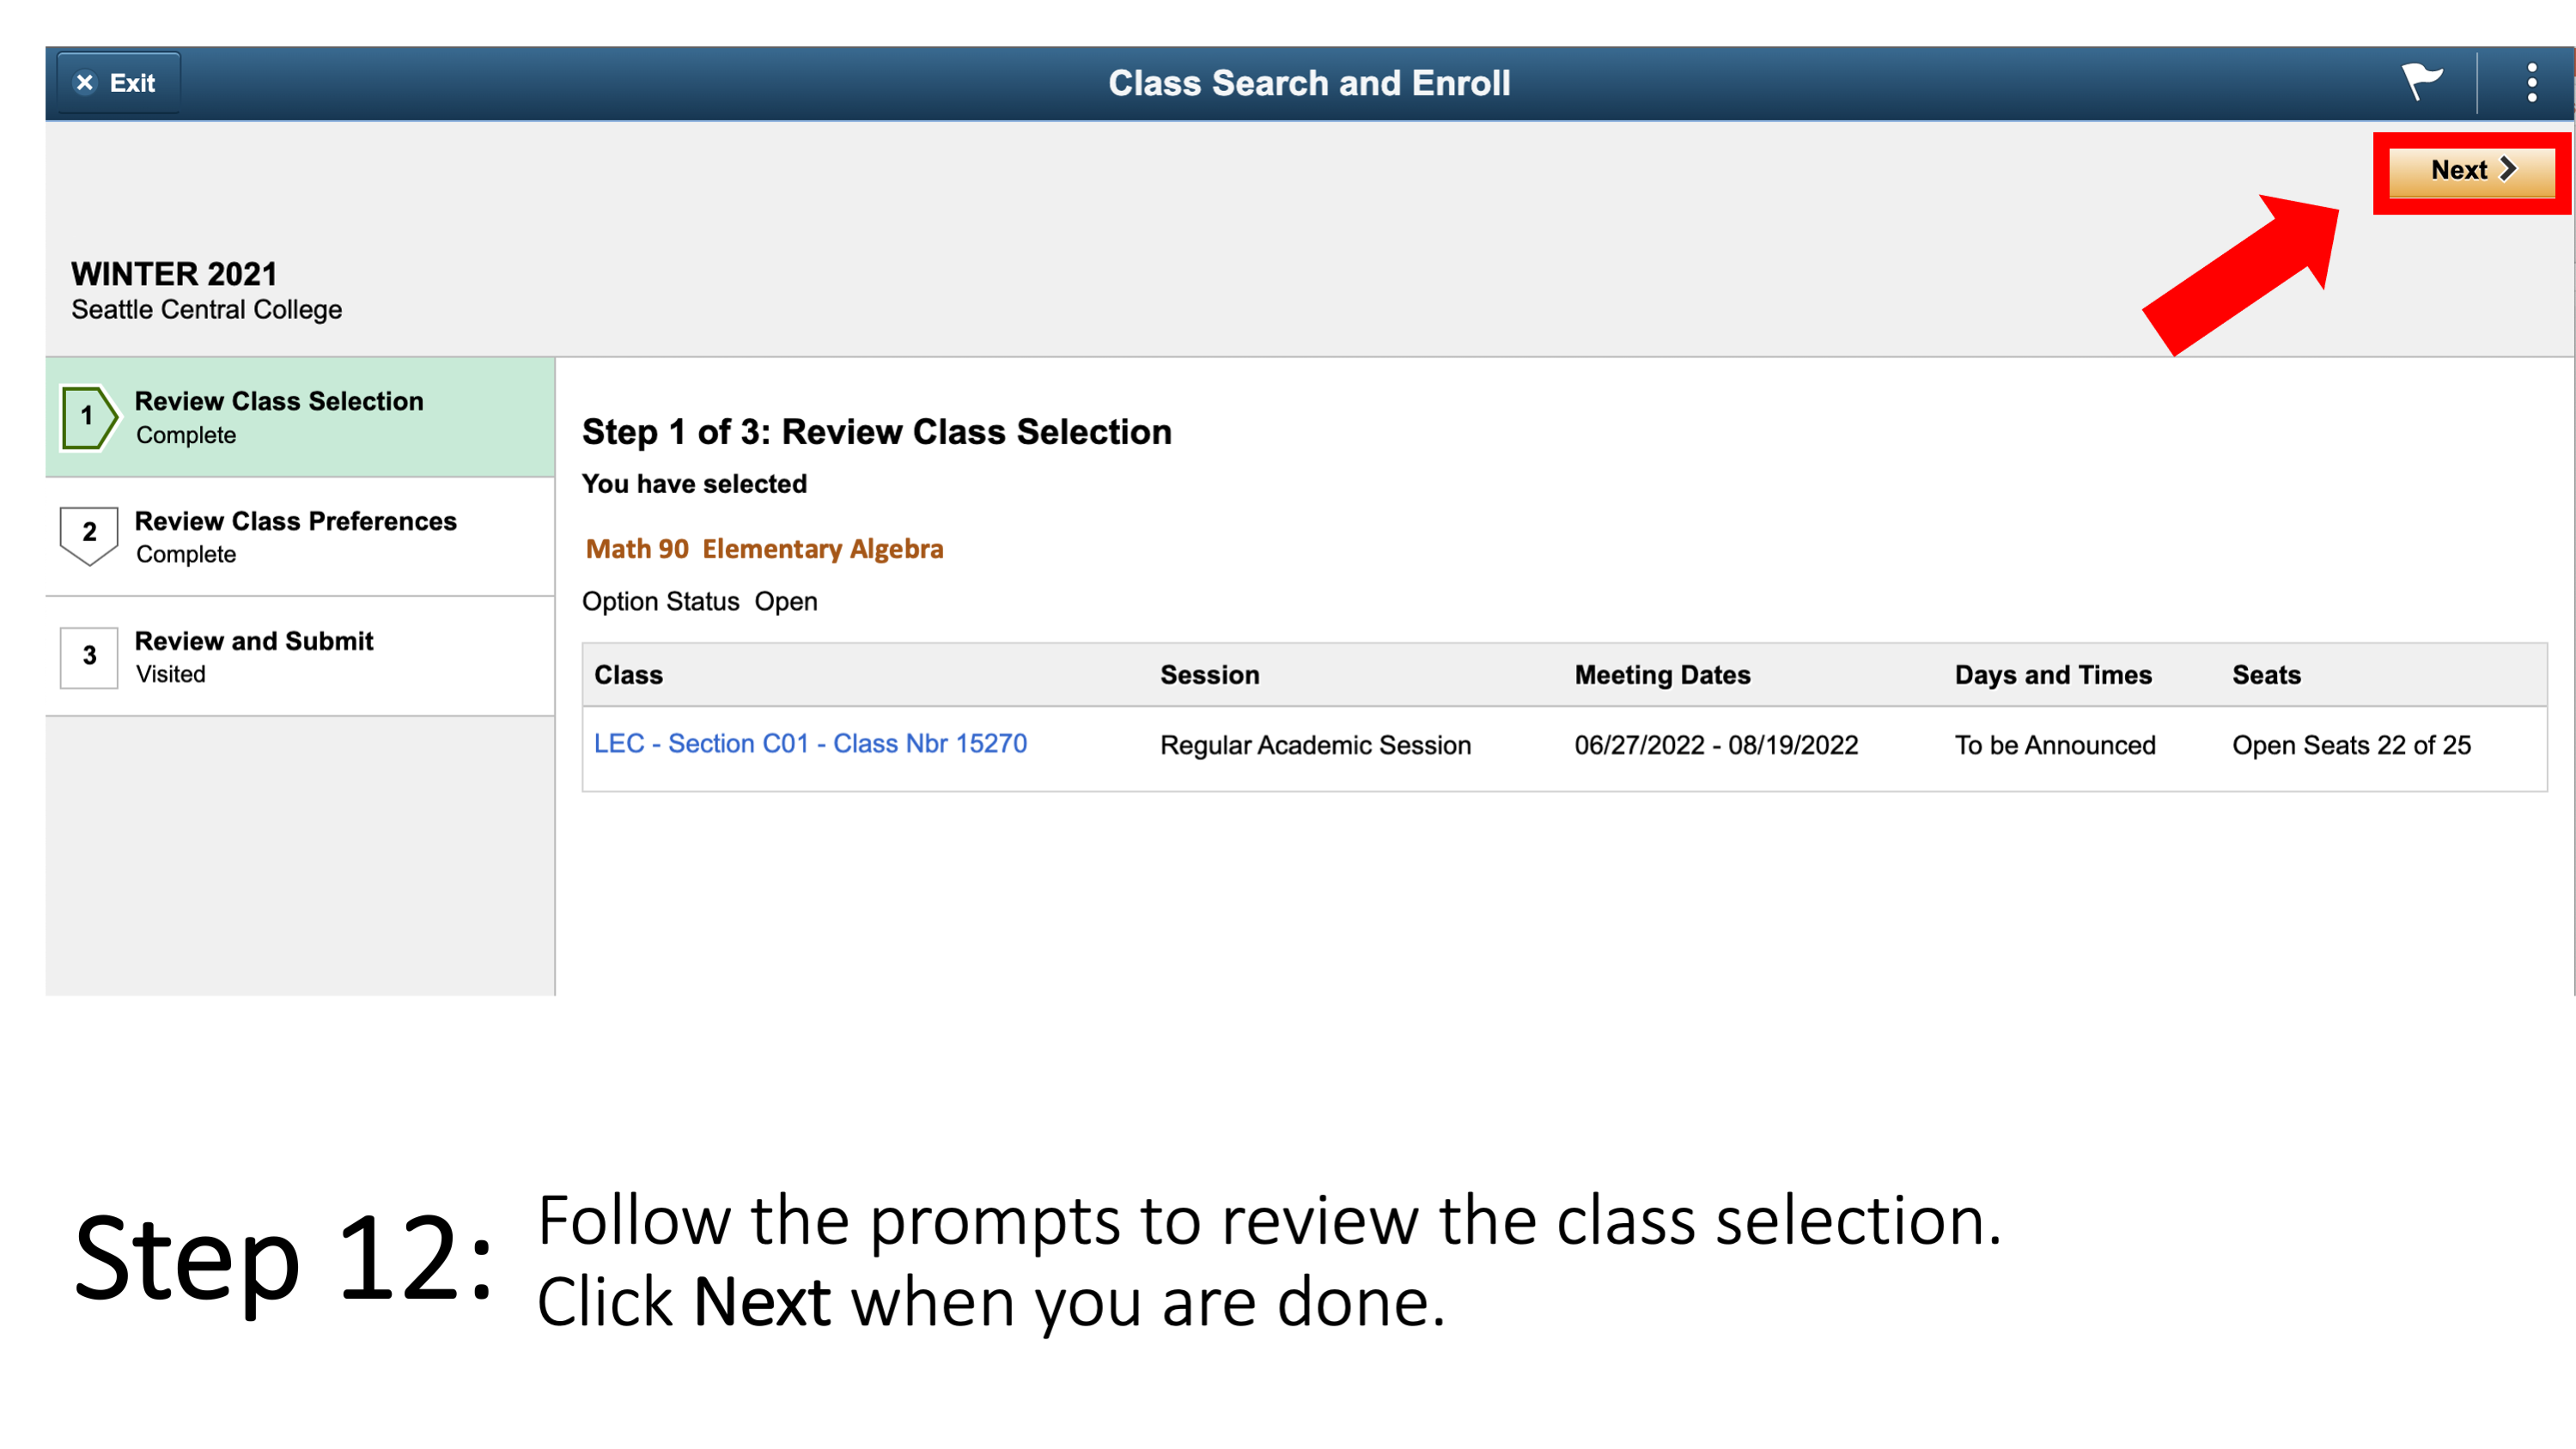 Slide 13: Follow the prompts to review the class selection. Click Next when you are done.